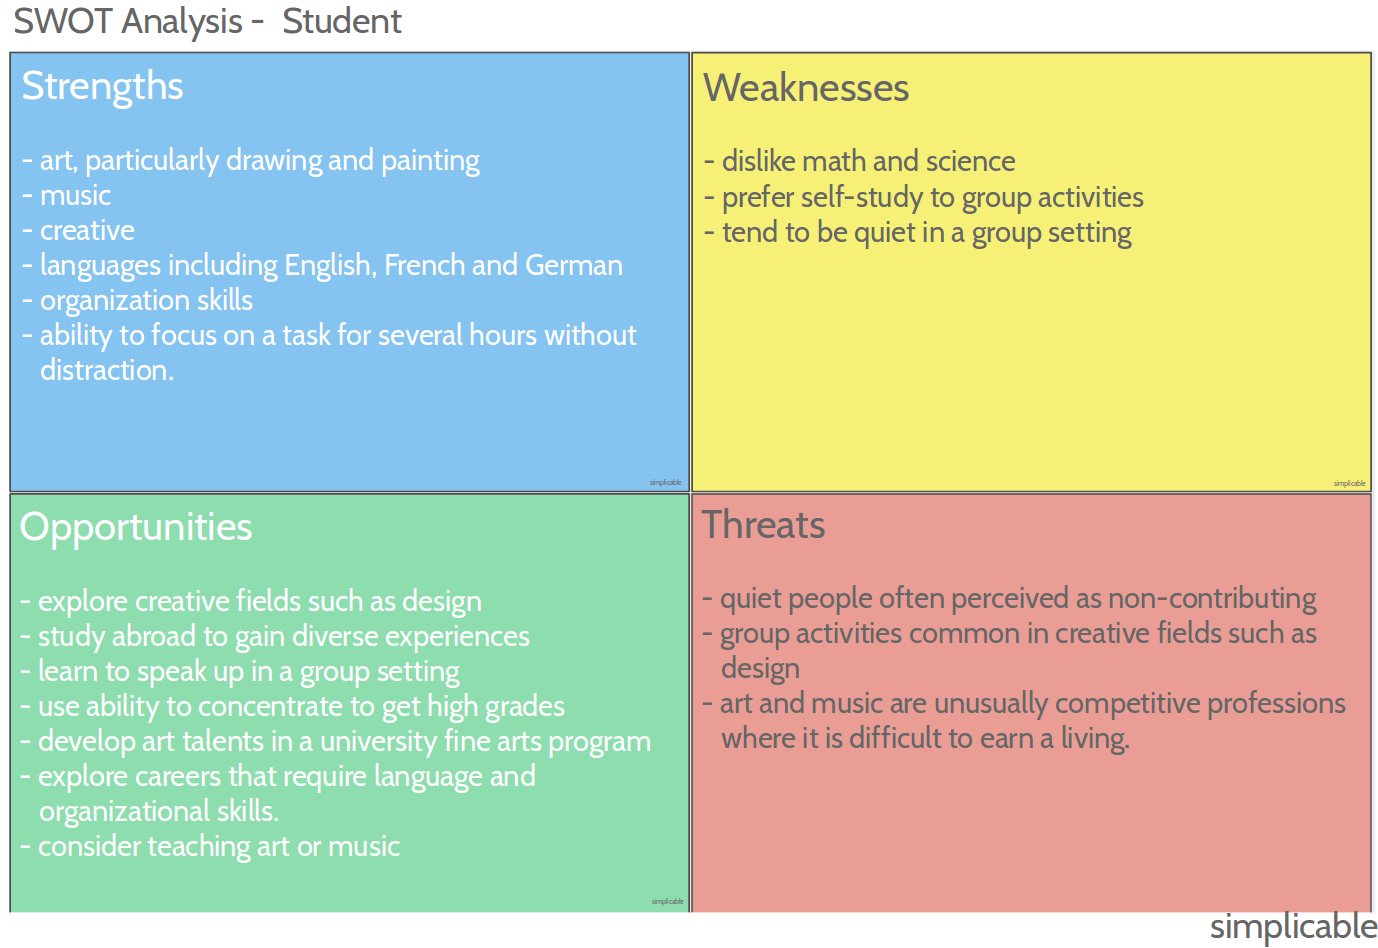 Example of a swot analysis for a student who is creative but dislikes group work and math.